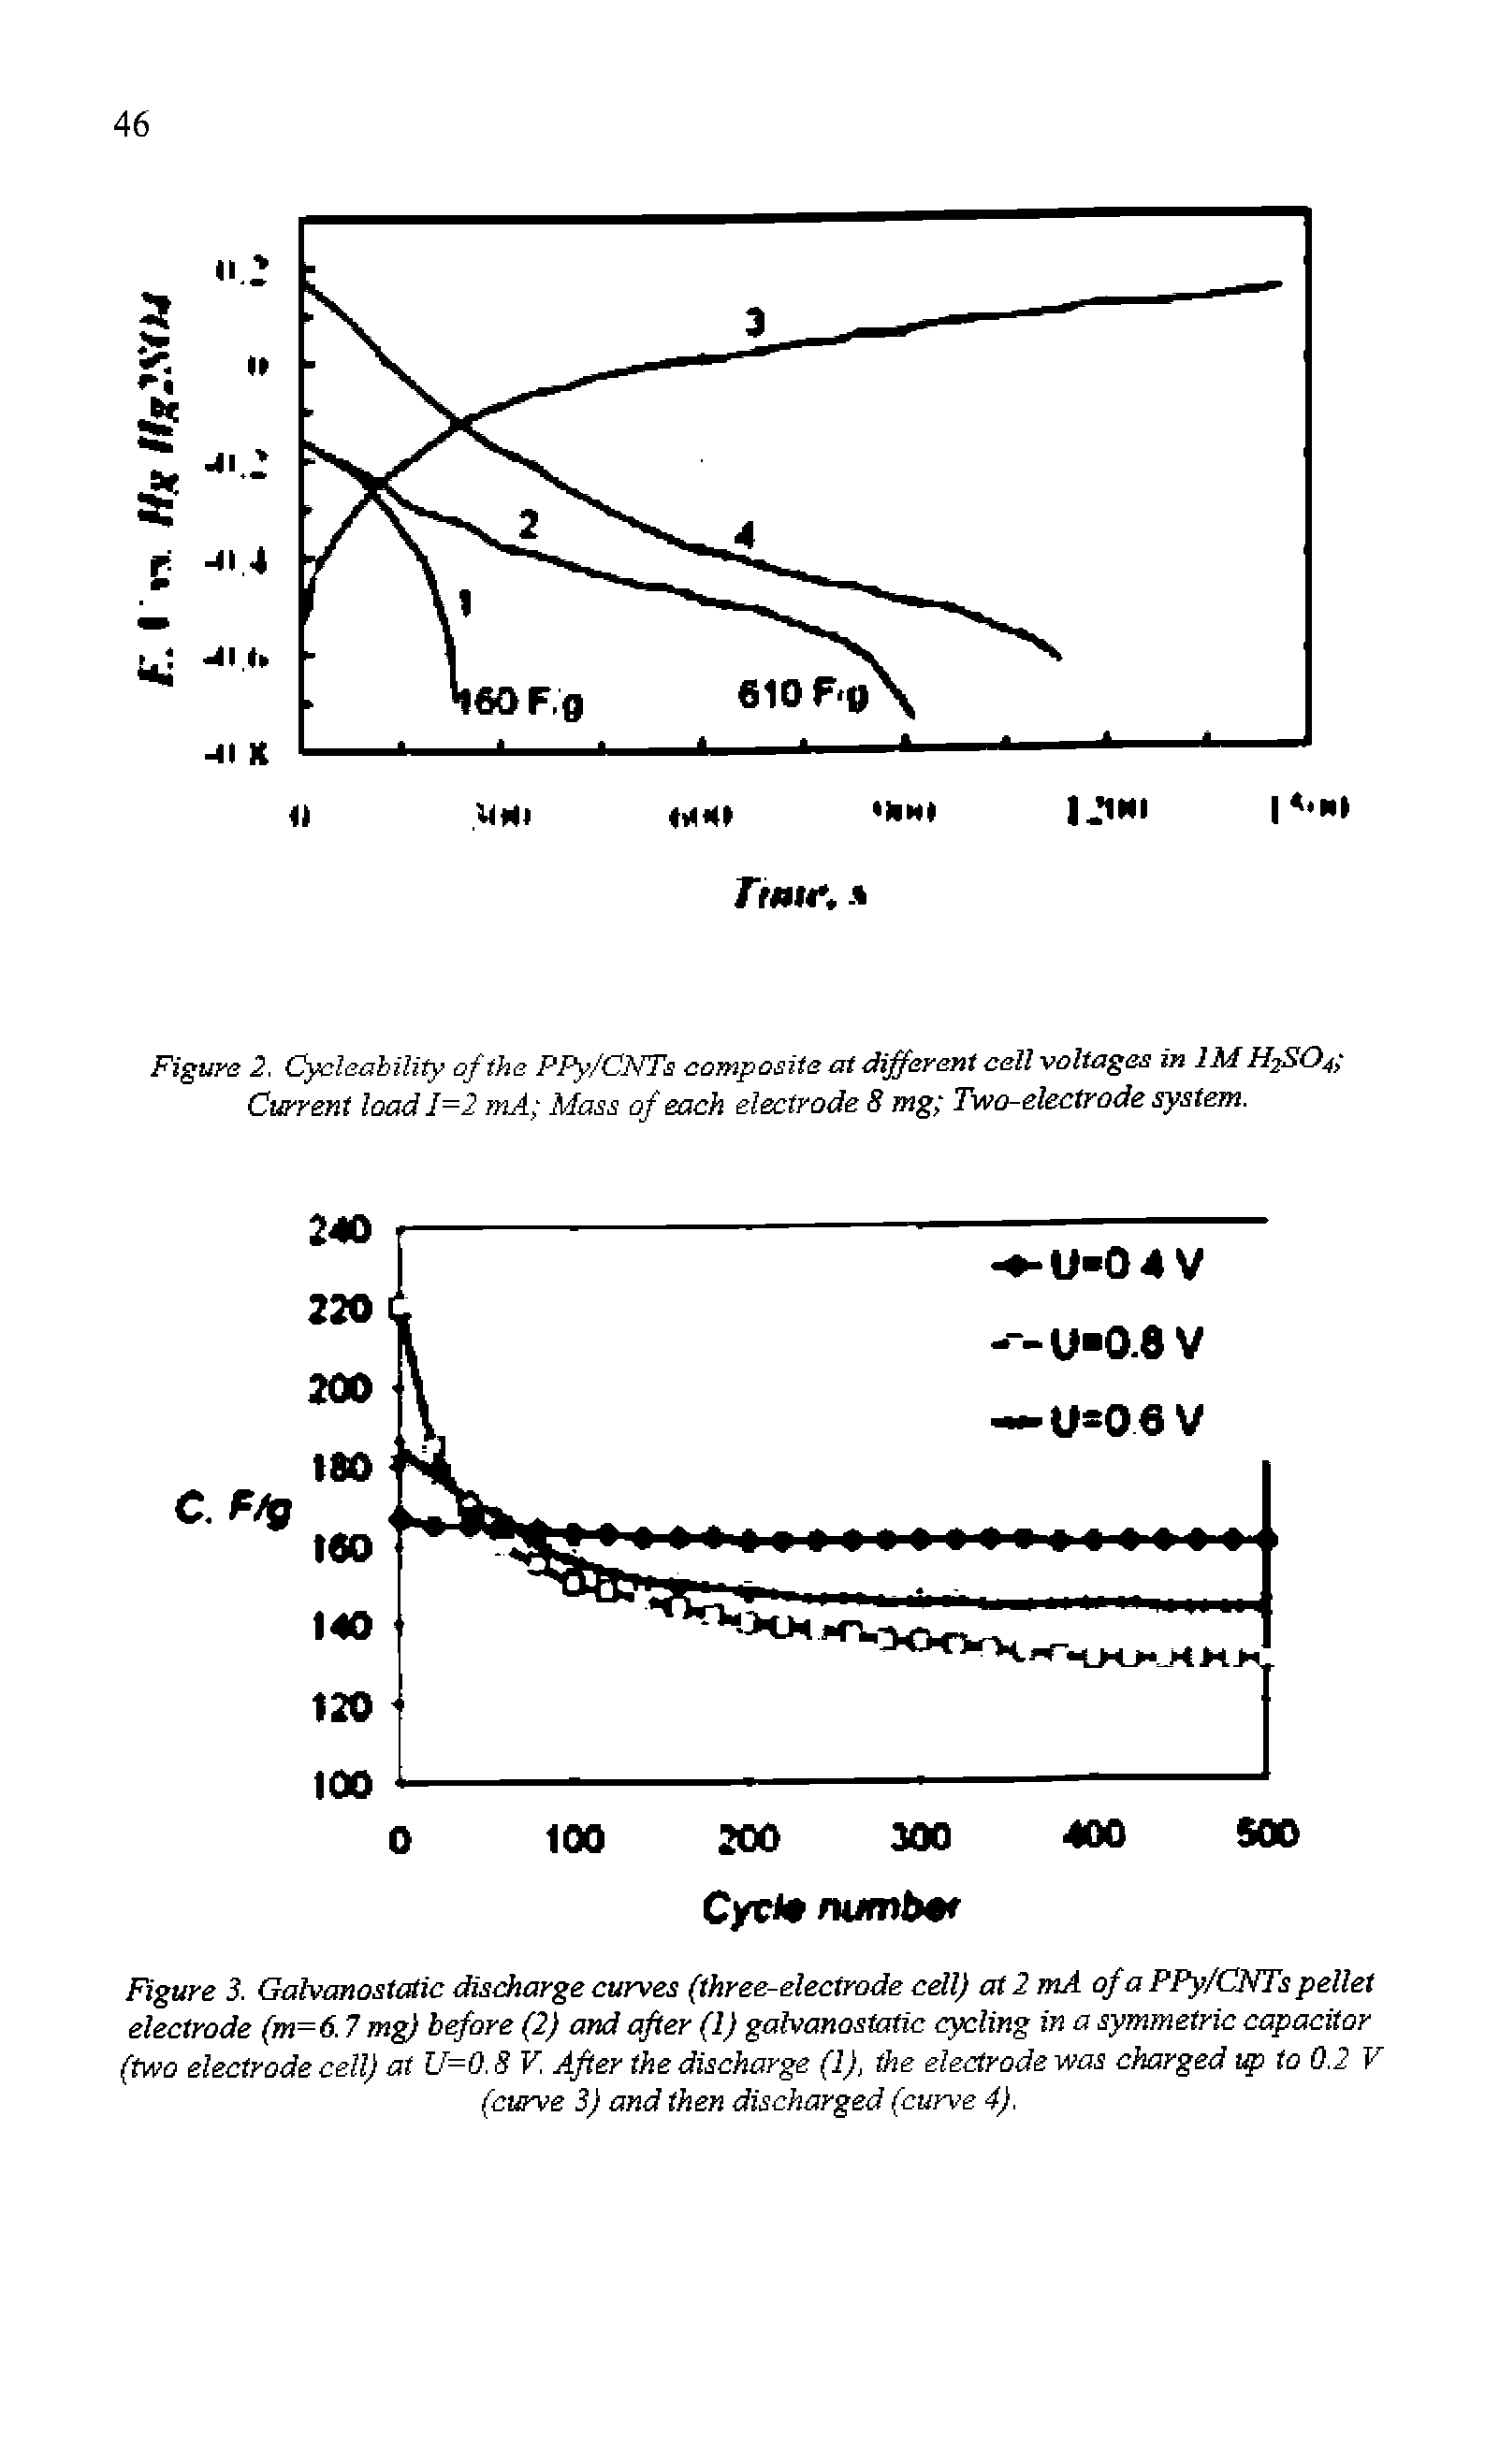 Figure 3. Galvanostatic discharge curves (three-electrode cell) at 2 mA ofaPPy/CNTs pellet electrode (m=6.7 mg) before (2) and after (1) galvanostatic cycling in a symmetric capacitor (two electrode cell) at U=0.8 V. After the discharge (1), the electrode was charged up to 0.2 V (curve 3) and then discharged (curve 4).